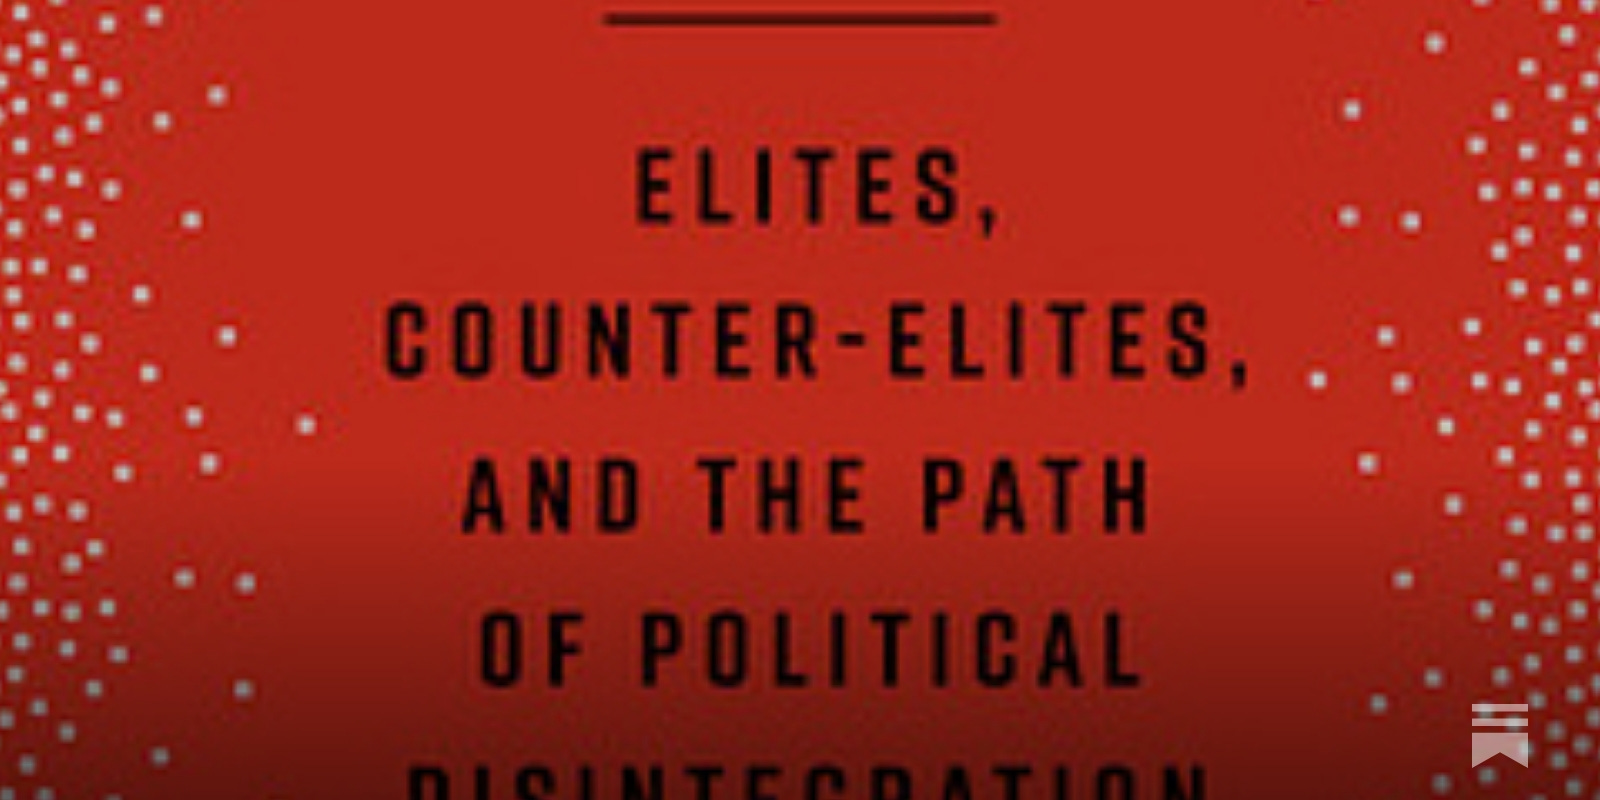 End Times: Elites, Counter-Elites, and the Path of Political Disintegration  by Peter Turchin